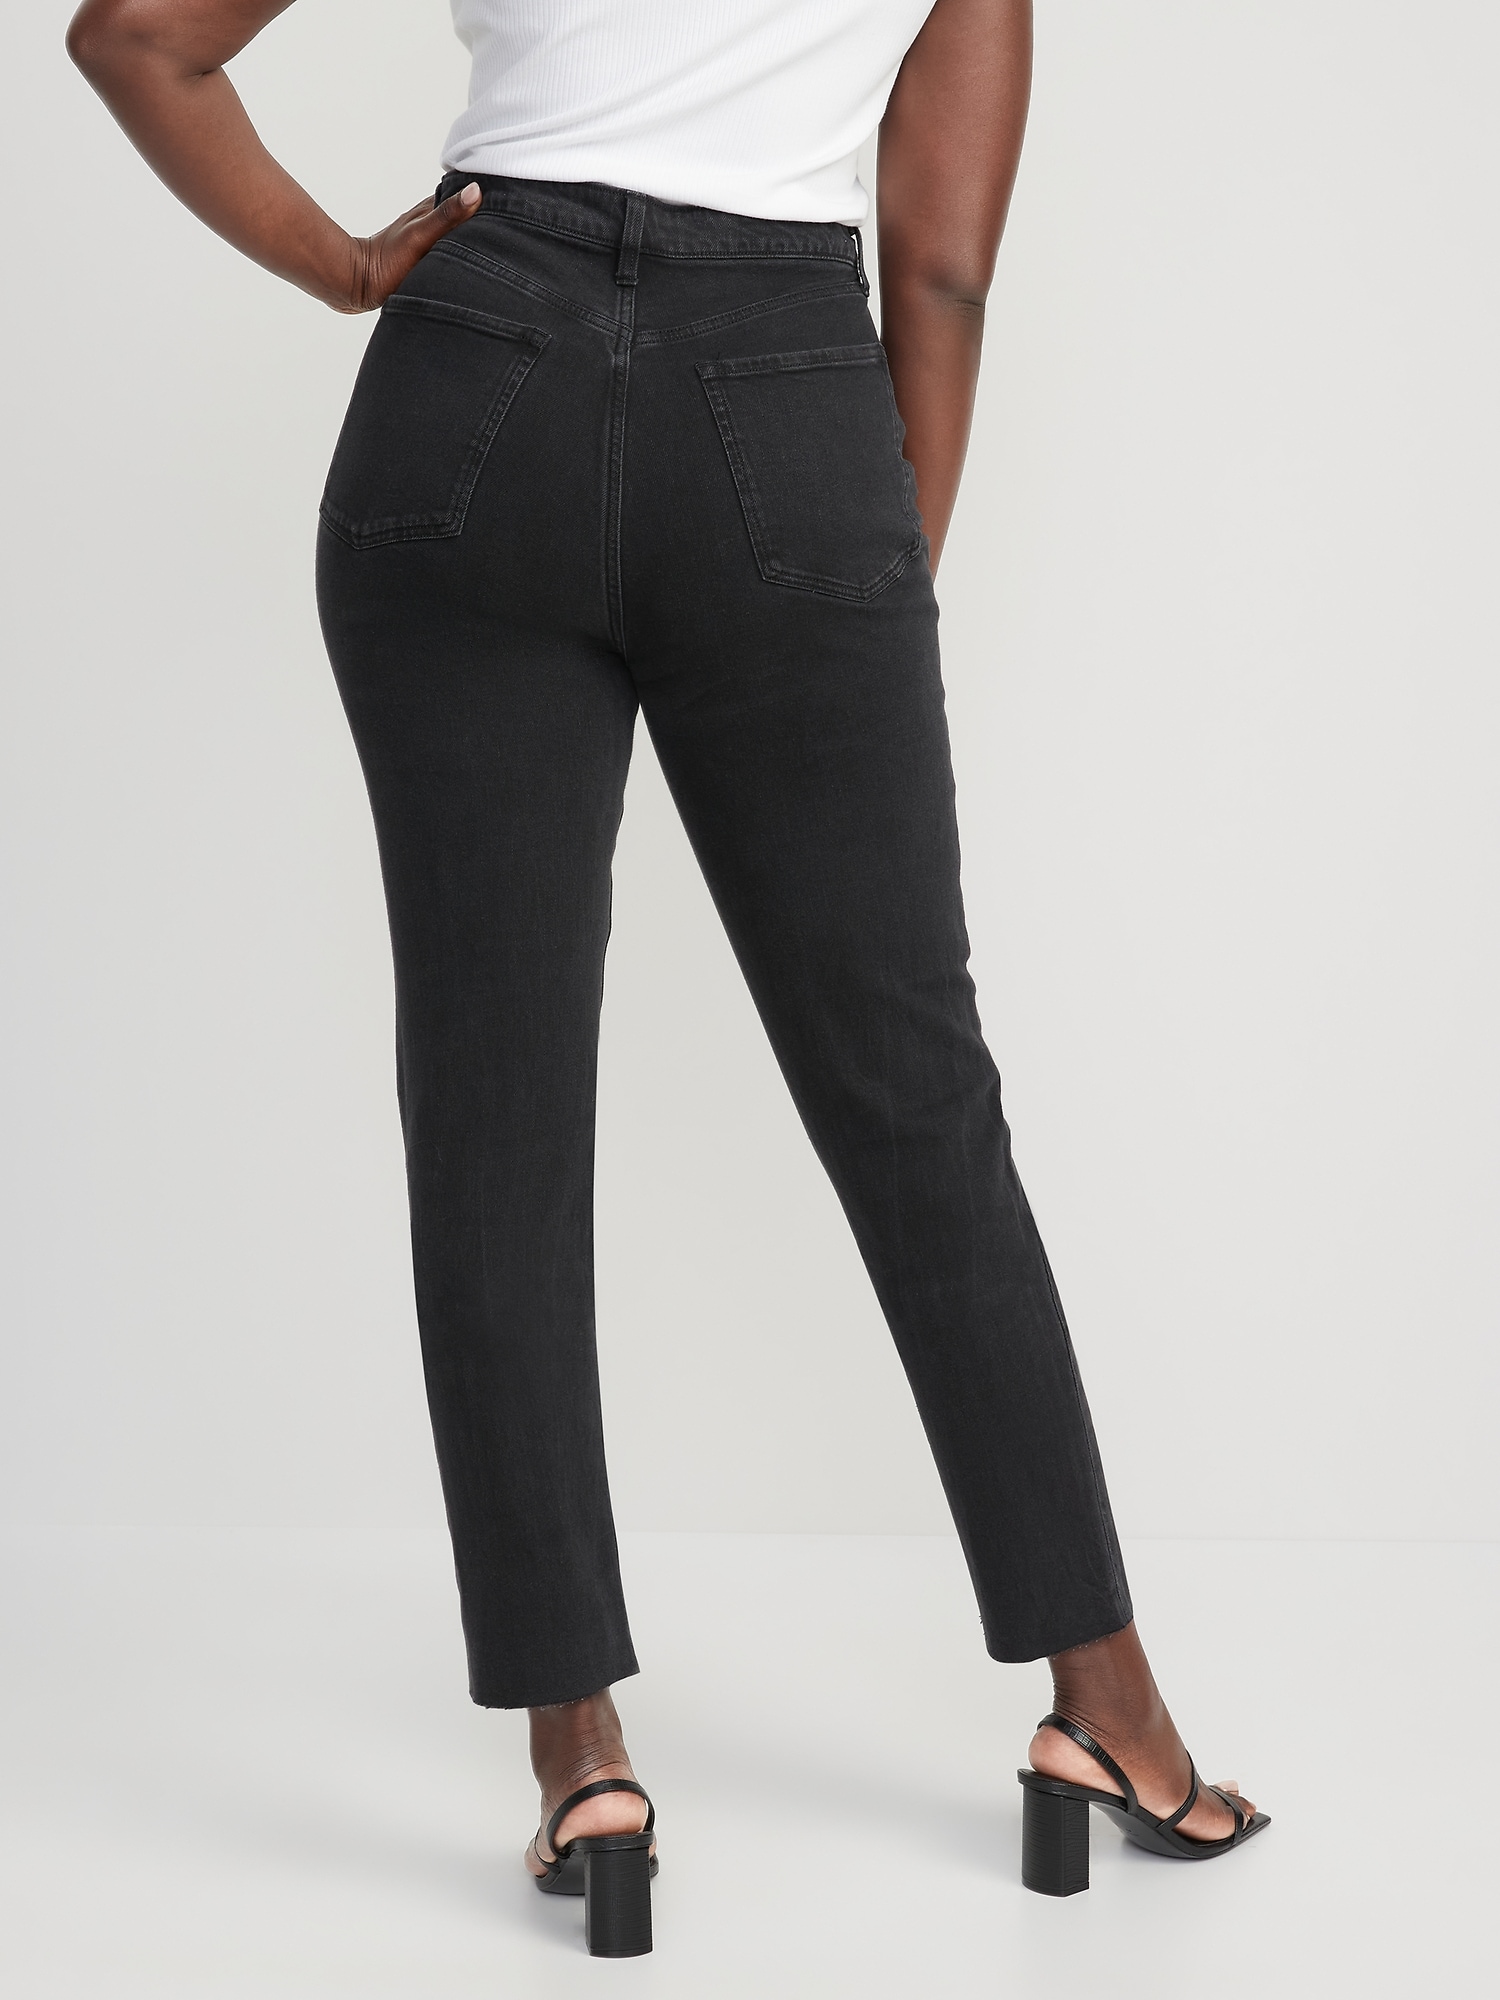 High Waisted Black Straight Ankle Jeans